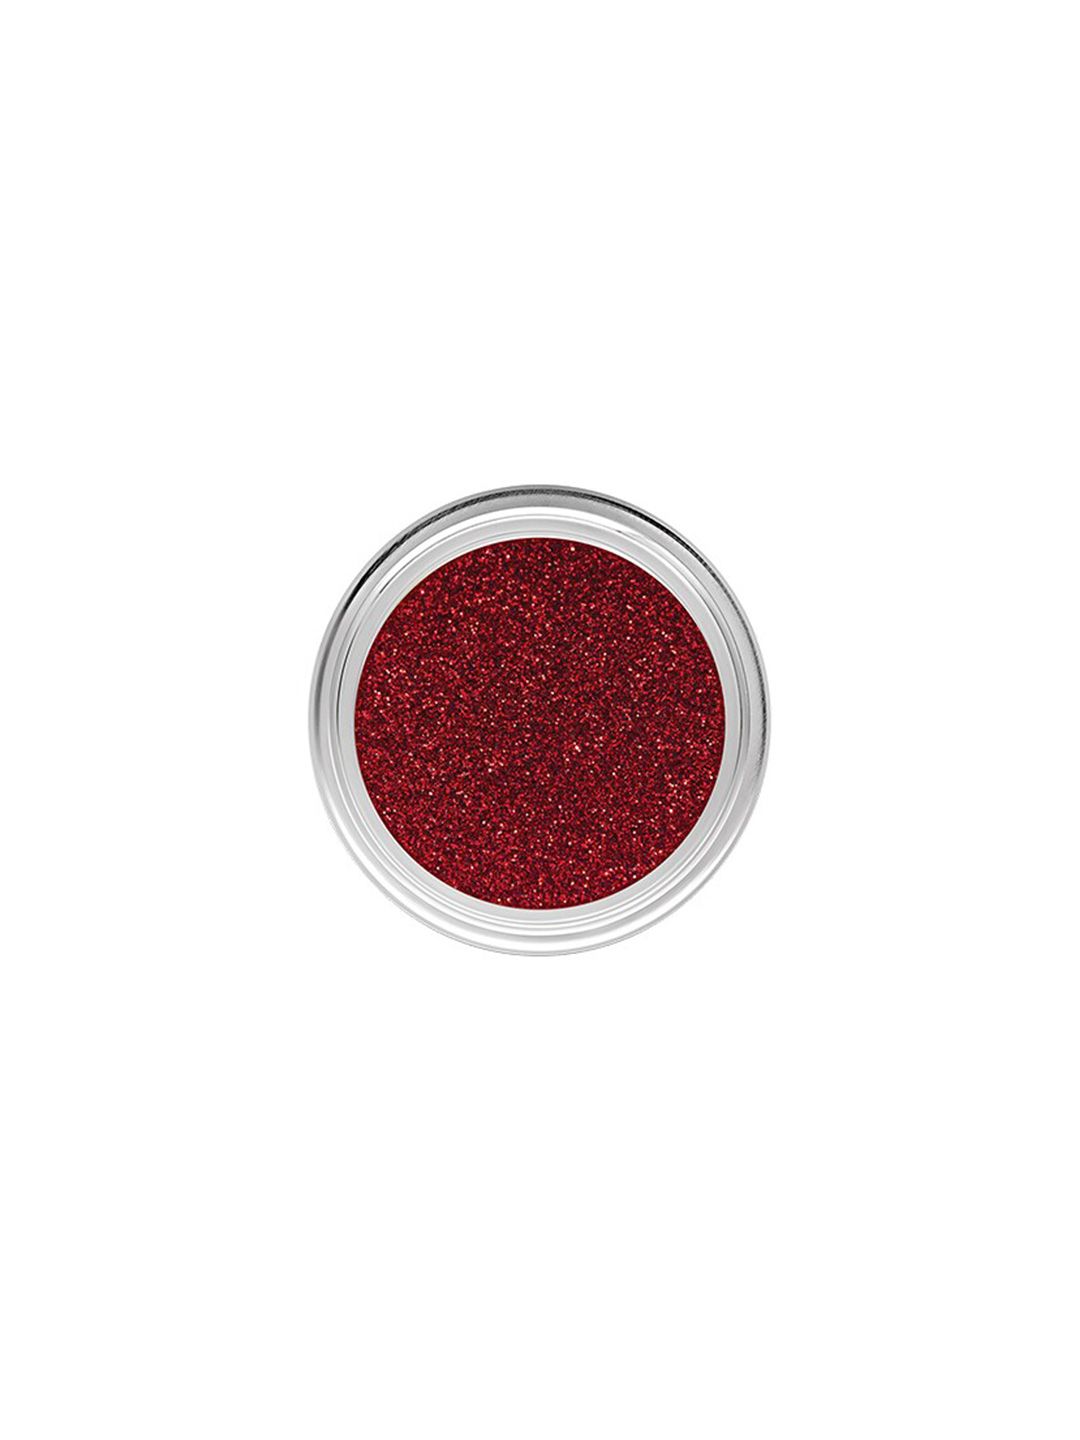 C2P PROFESSIONAL MAKEUP Uptown Loose Glitters Eyeshadow - Sparkling Red 33 Price in India